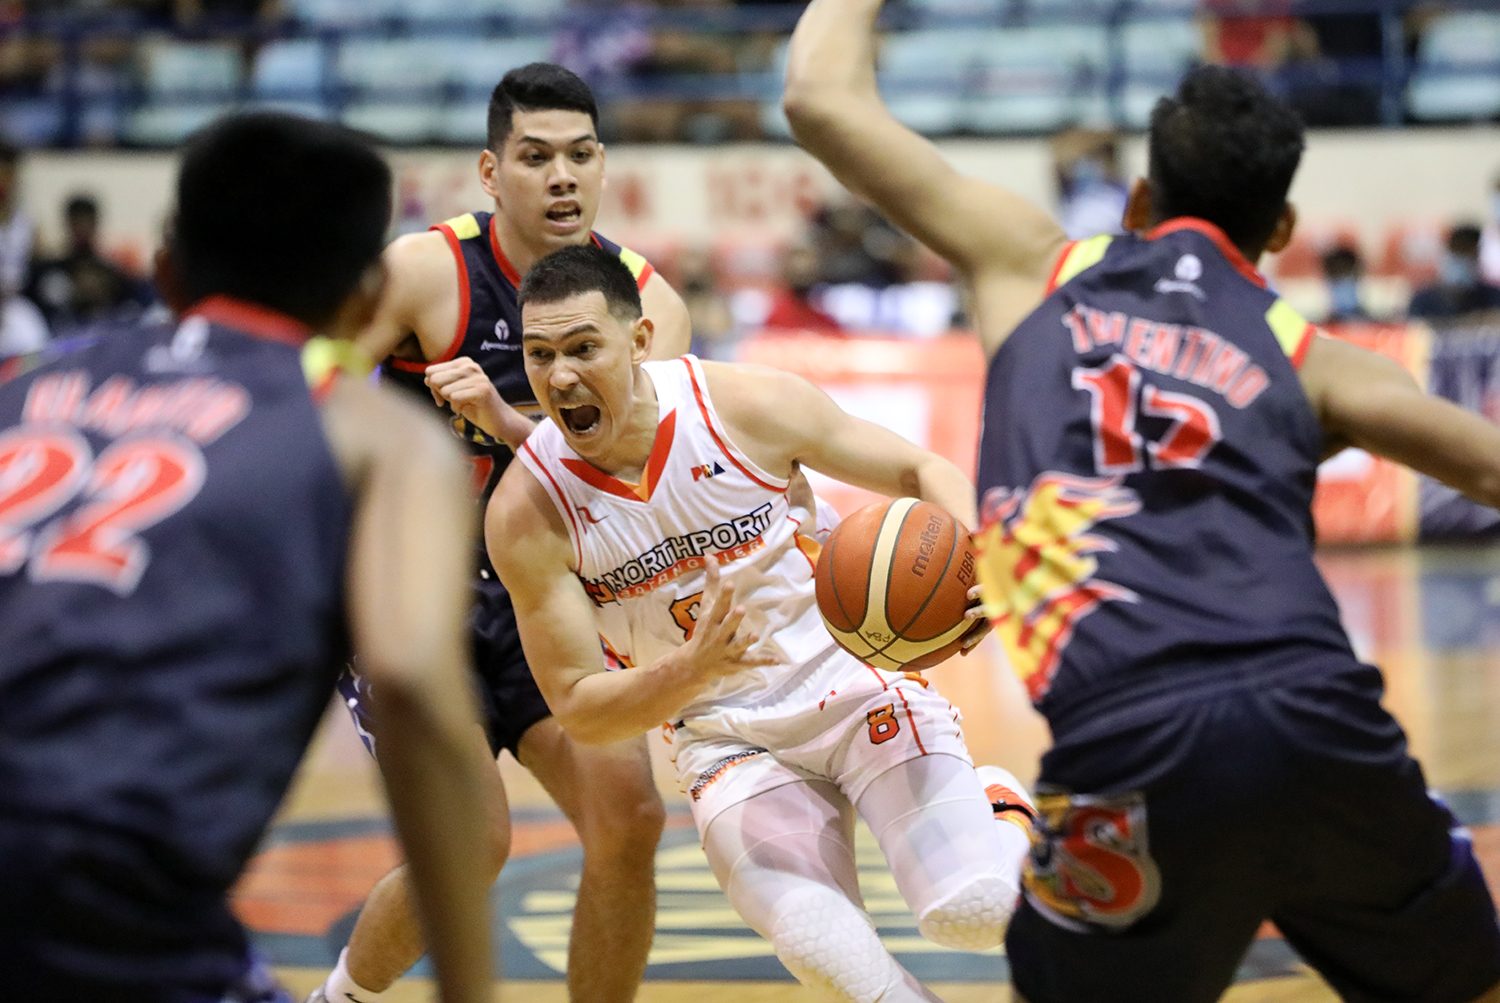 Bolick, Malonzo power NorthPort past Rain or Shine for hot PH Cup start